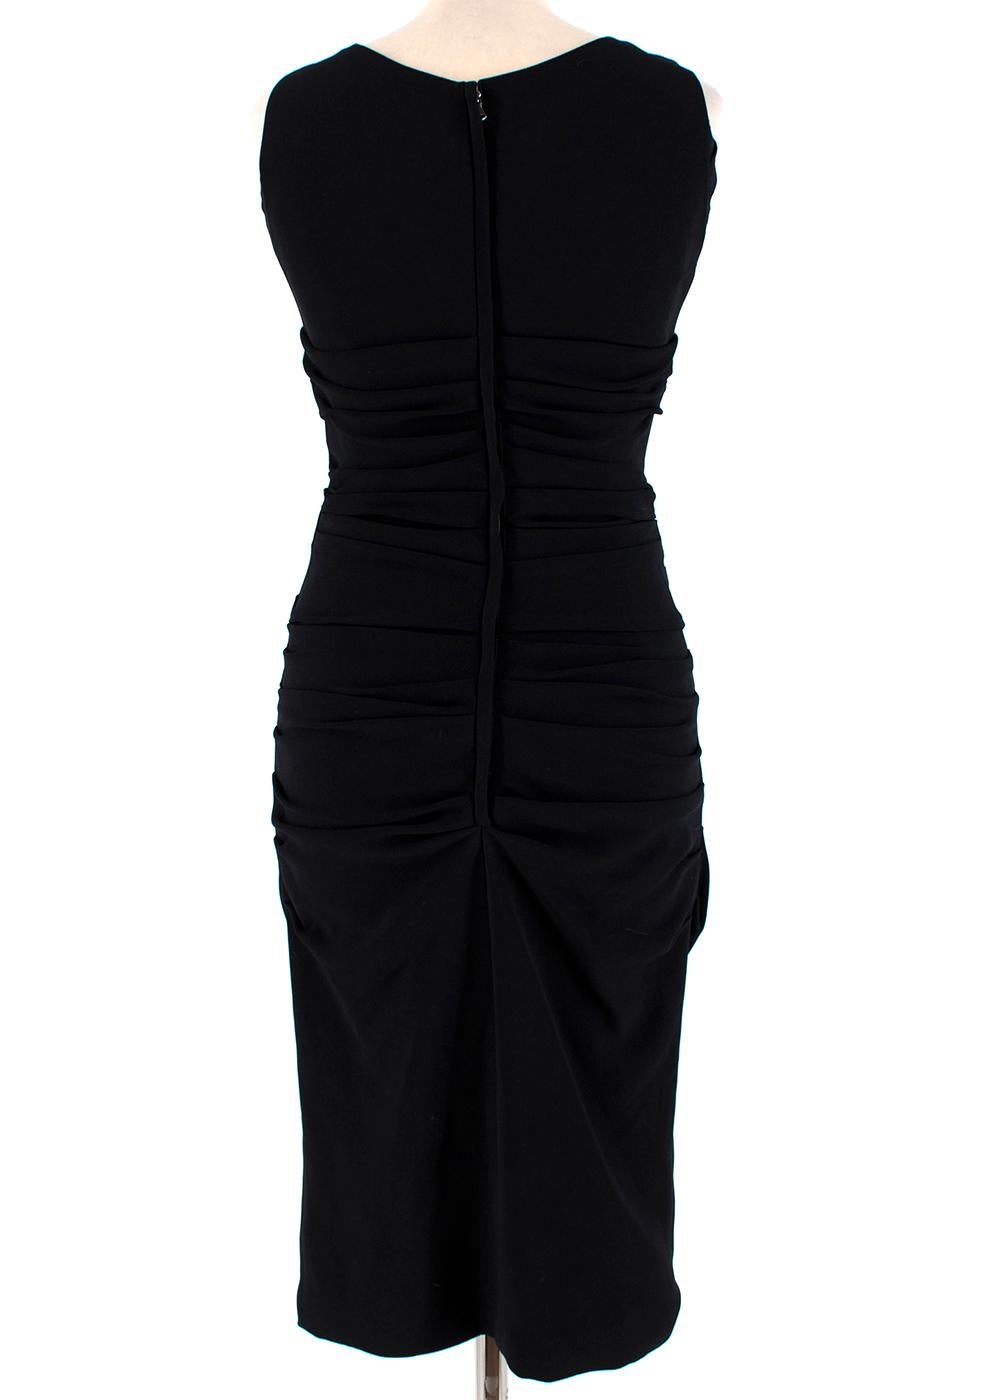 Dolce & Gabbana Ruched Black Sleeveless Dress - Size US 0-2 In Excellent Condition For Sale In London, GB